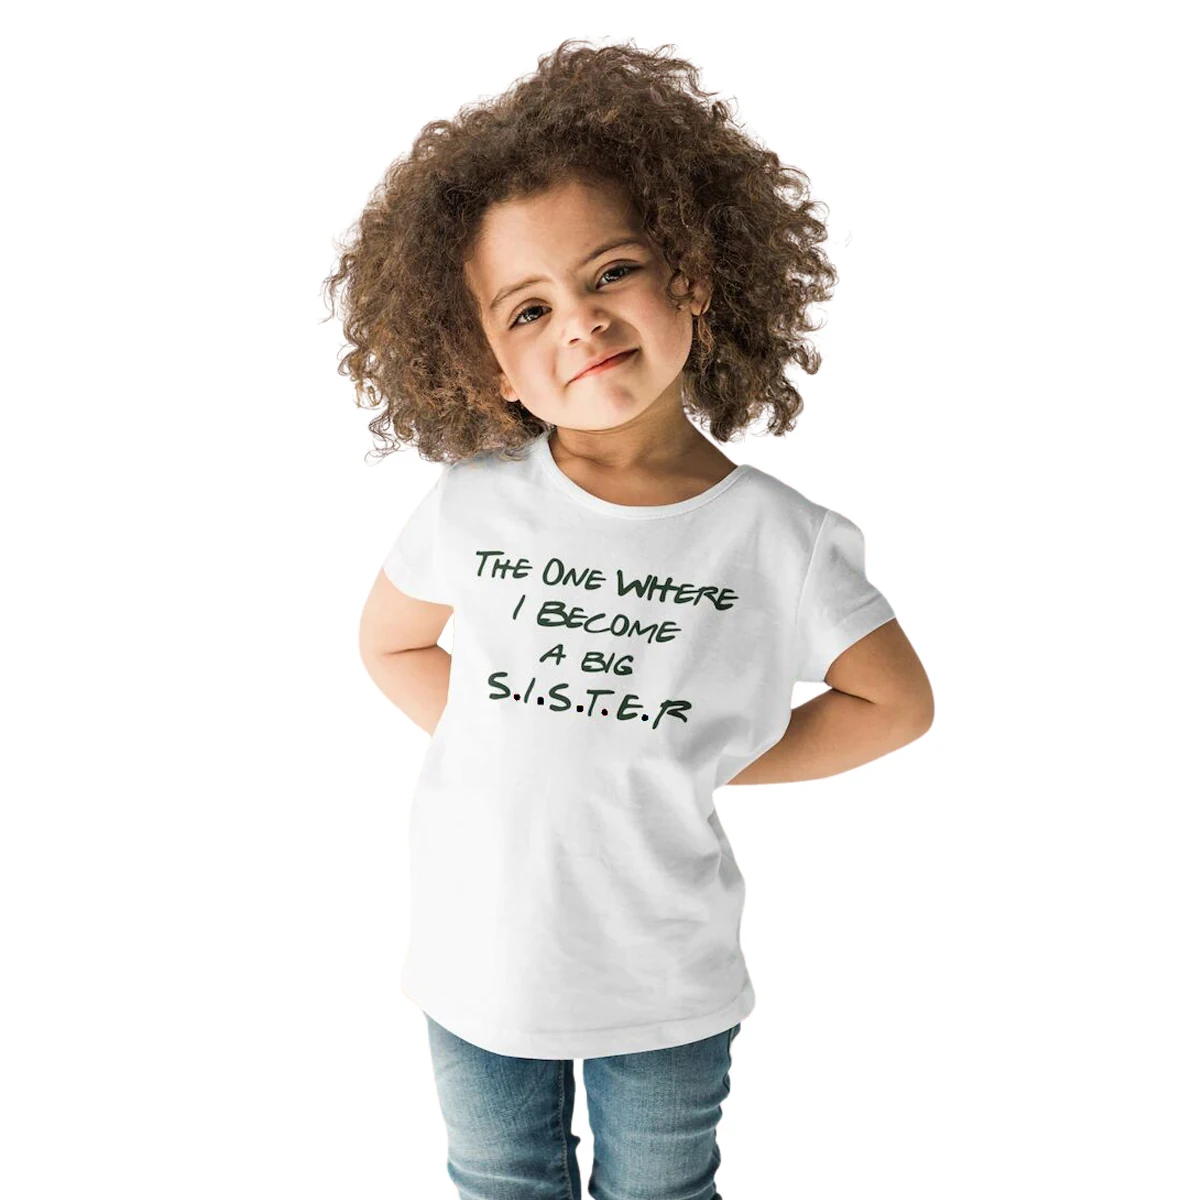 The One Where I Become a Big Sister cotton T Shirt Baby Announcement Kids T-Shirt toddler shirt graphic tees tops drop shipping